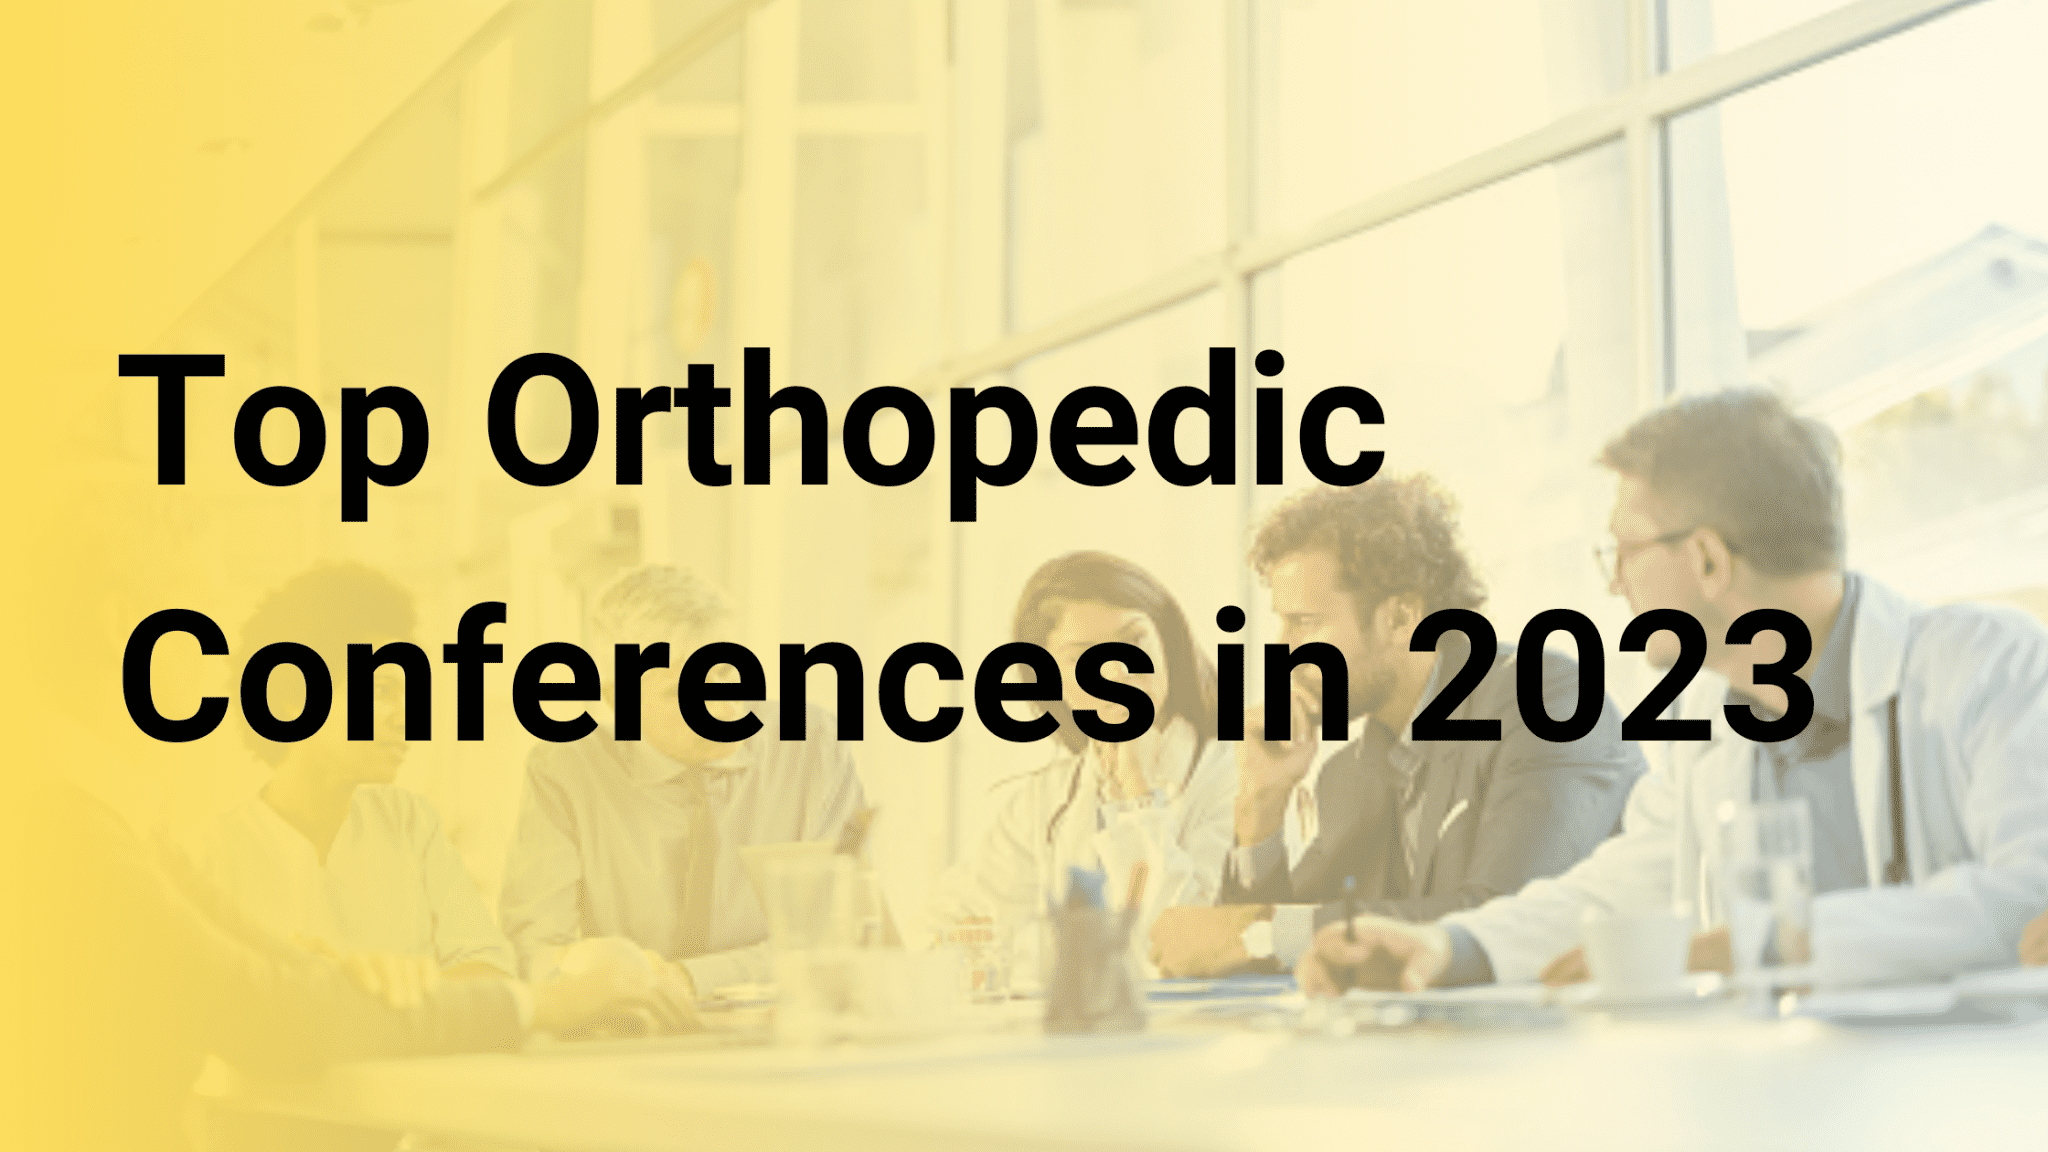 Top Orthopedic Conferences In 2023 1 2048x1152 